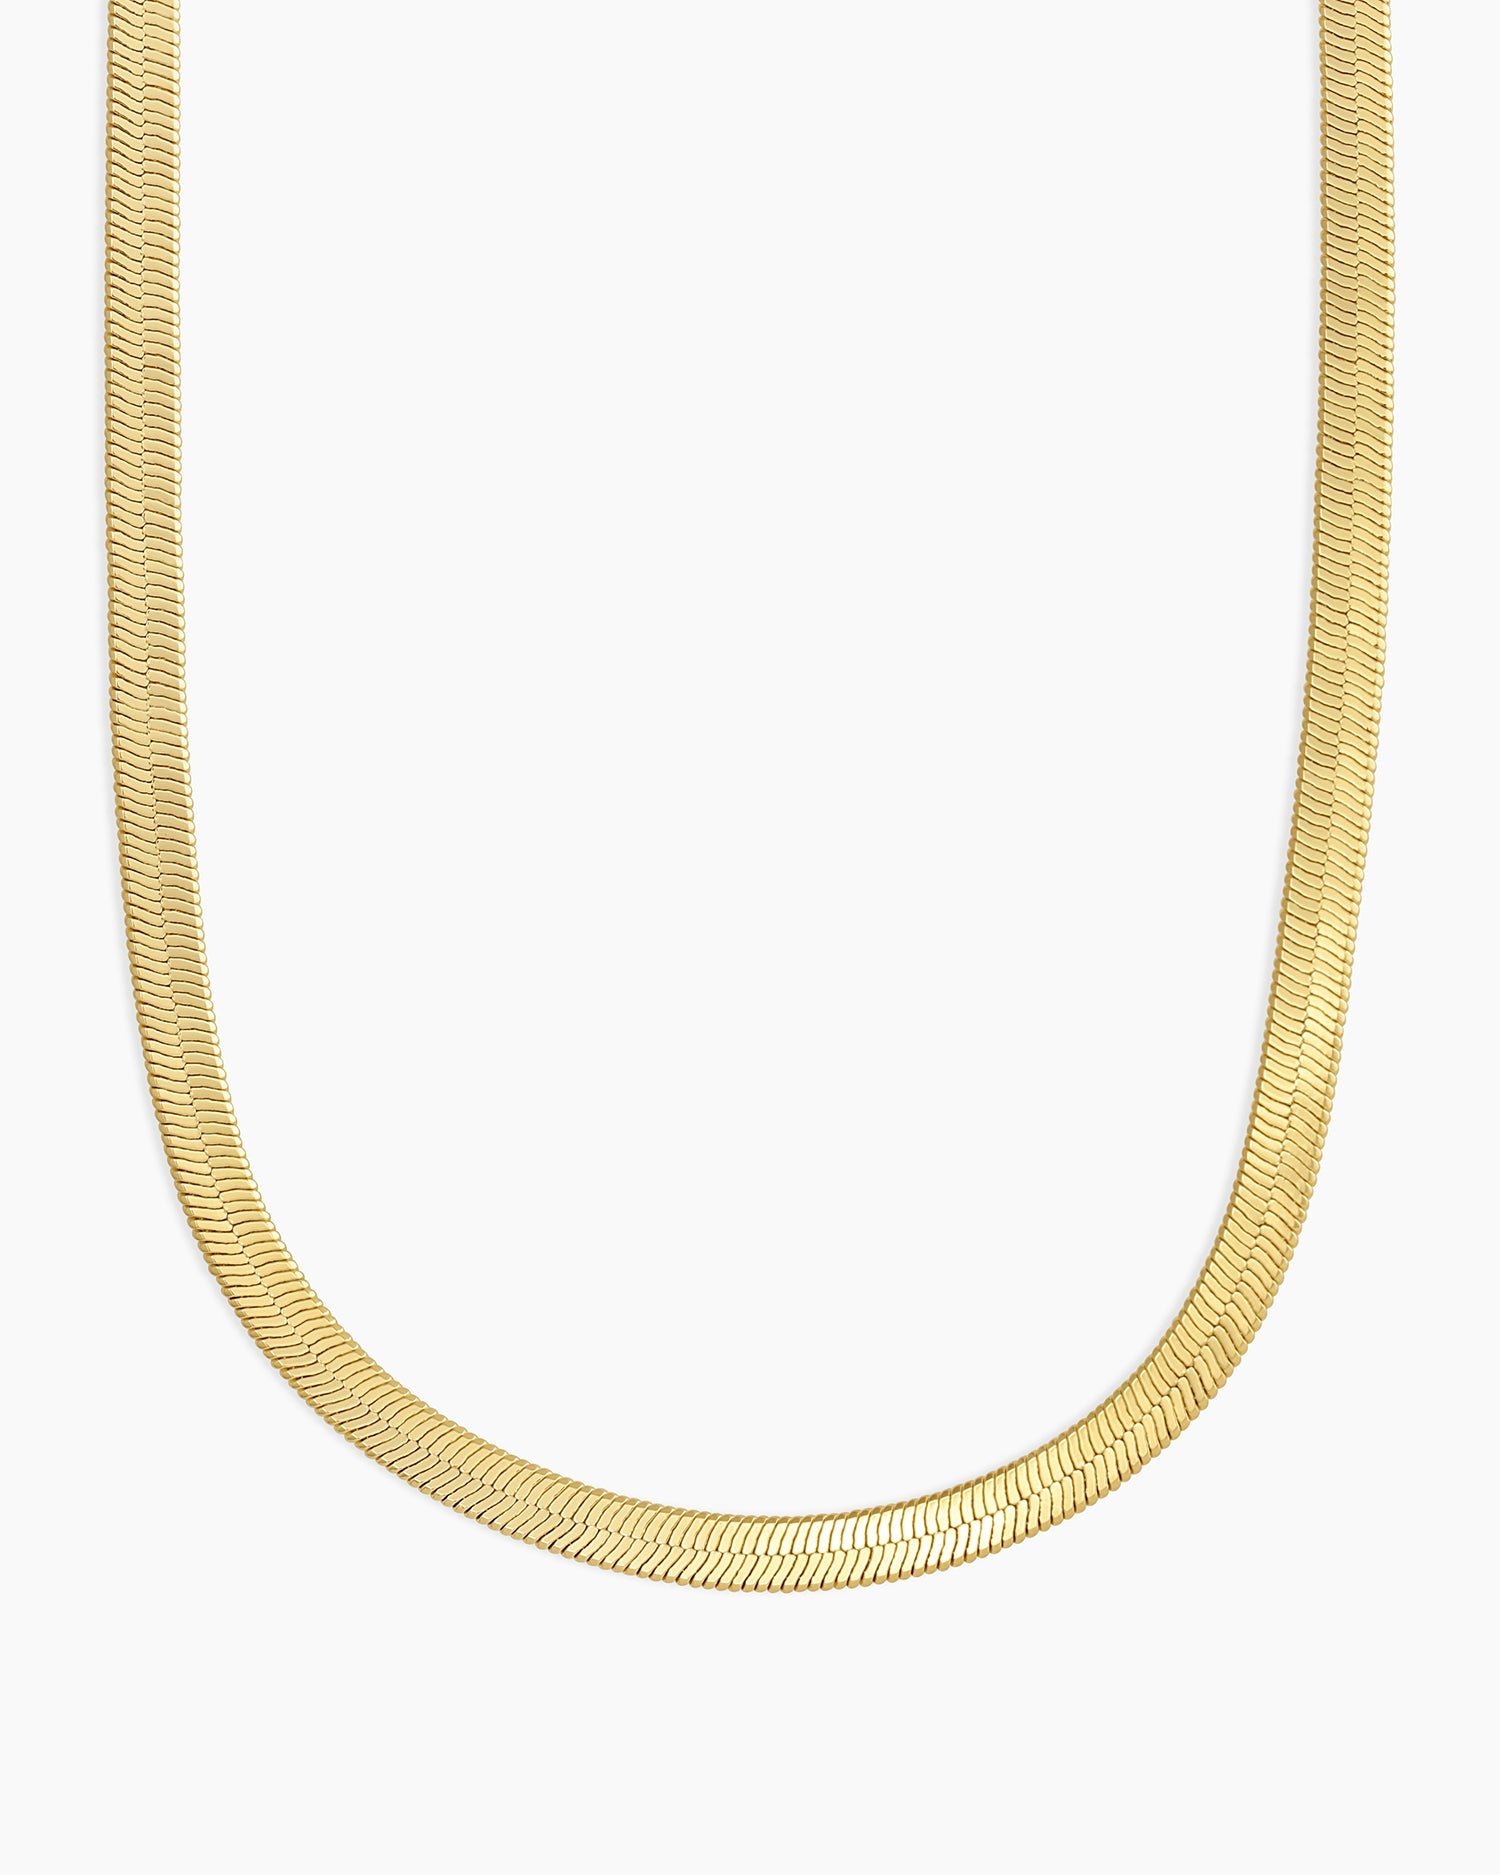 Venice Necklace || option::17 in., Gold Plated